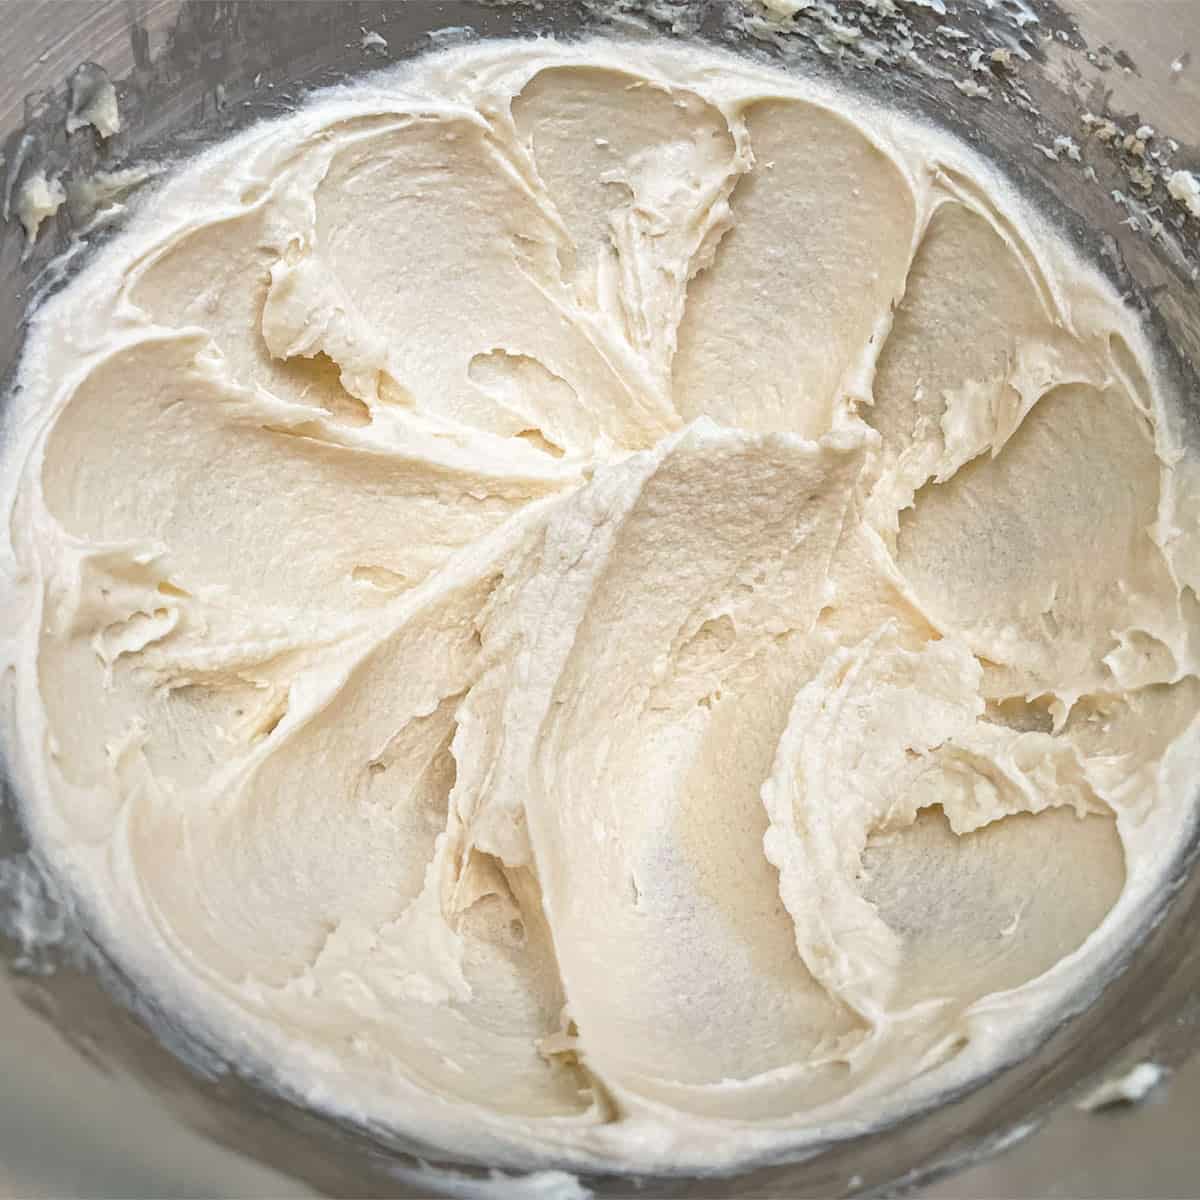 Creamy looking butter, cream cheese, and both sugars are beaten for three minutes.